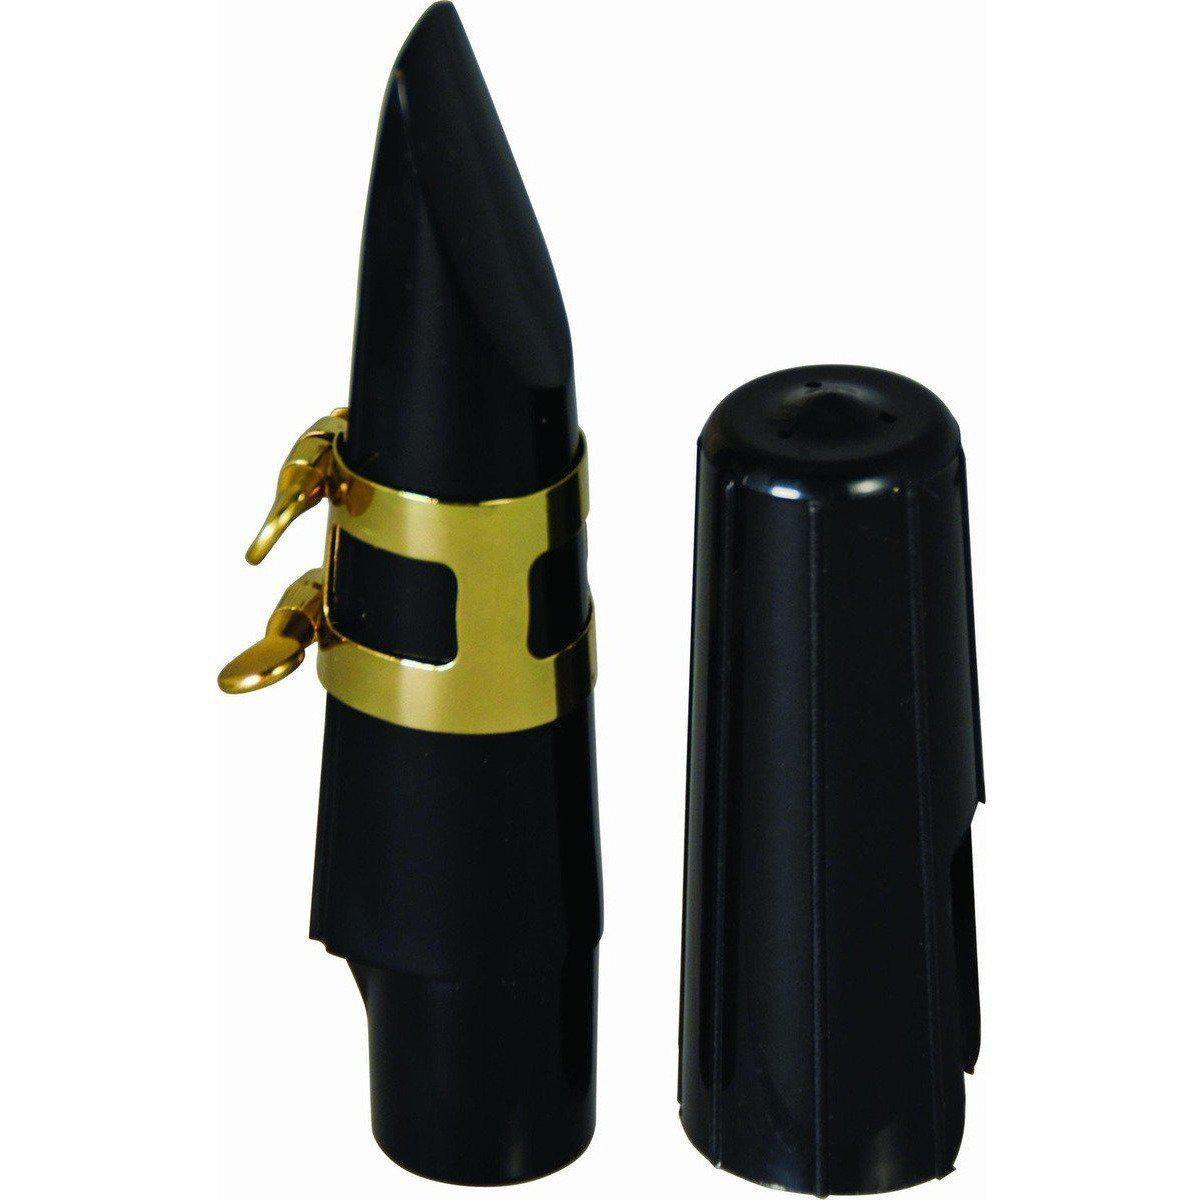 Baritone Saxophone Mouthpiece Kit - Value Series-Andy's Music